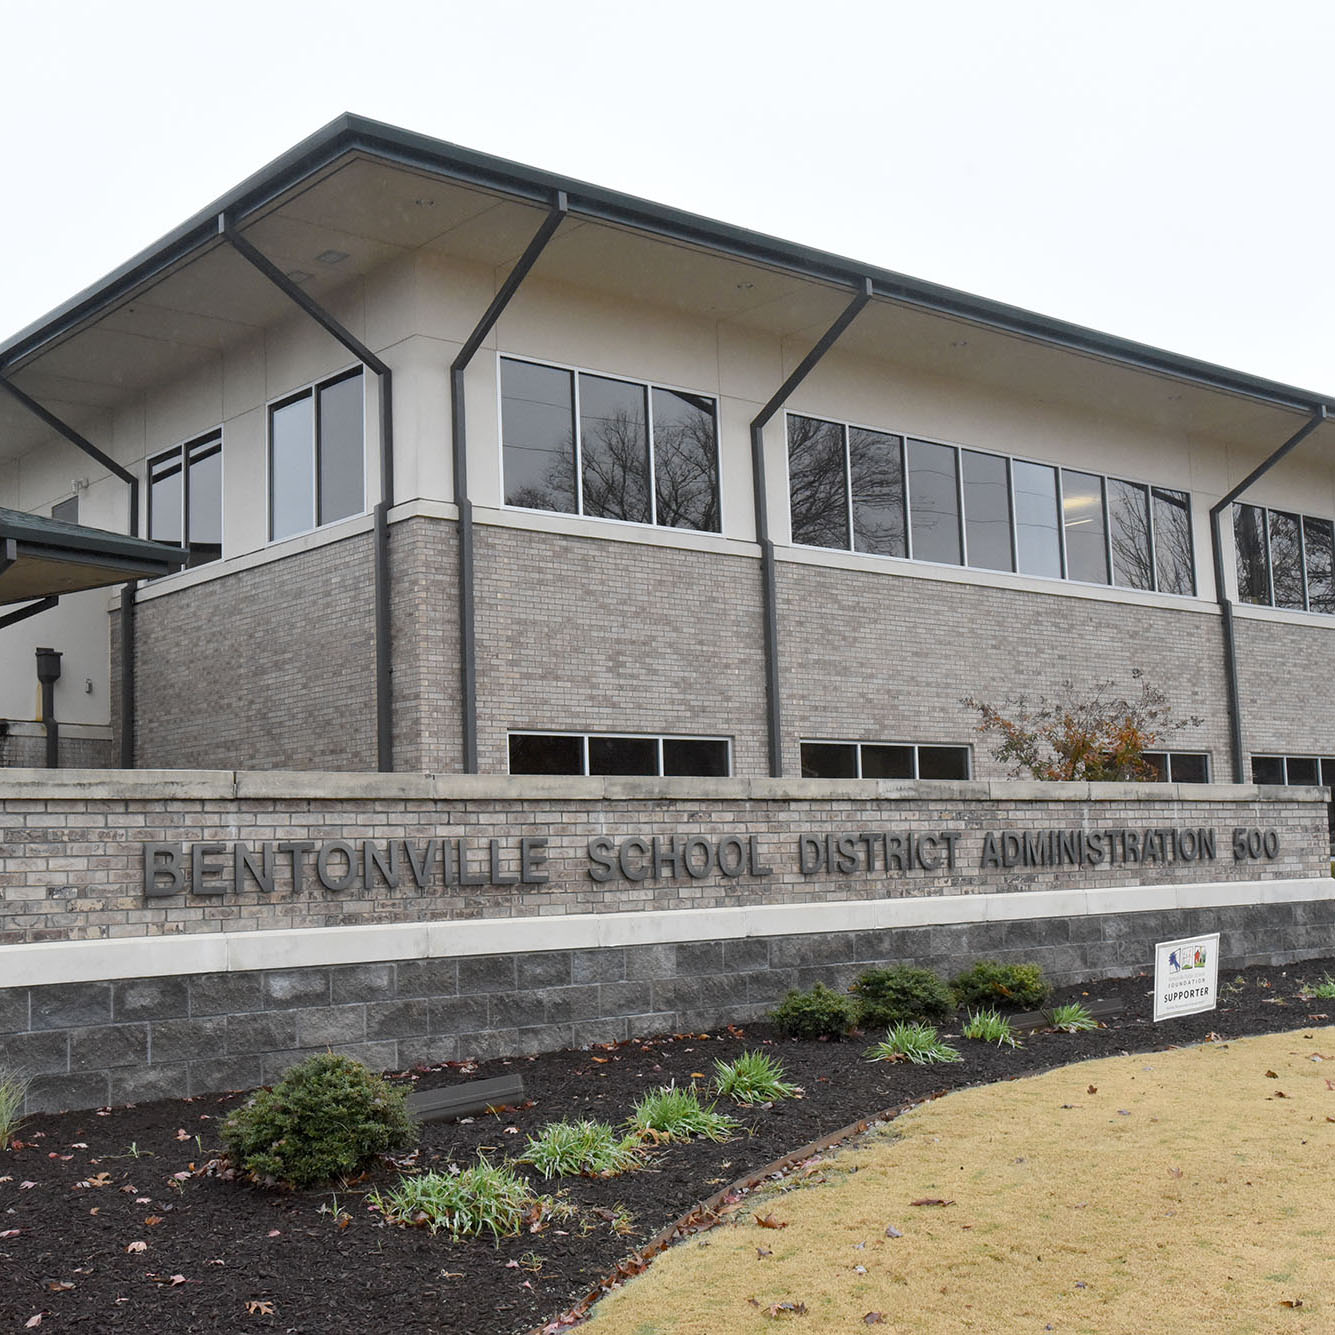 What are the community's thoughts on downtown Bentonville elementary schools?